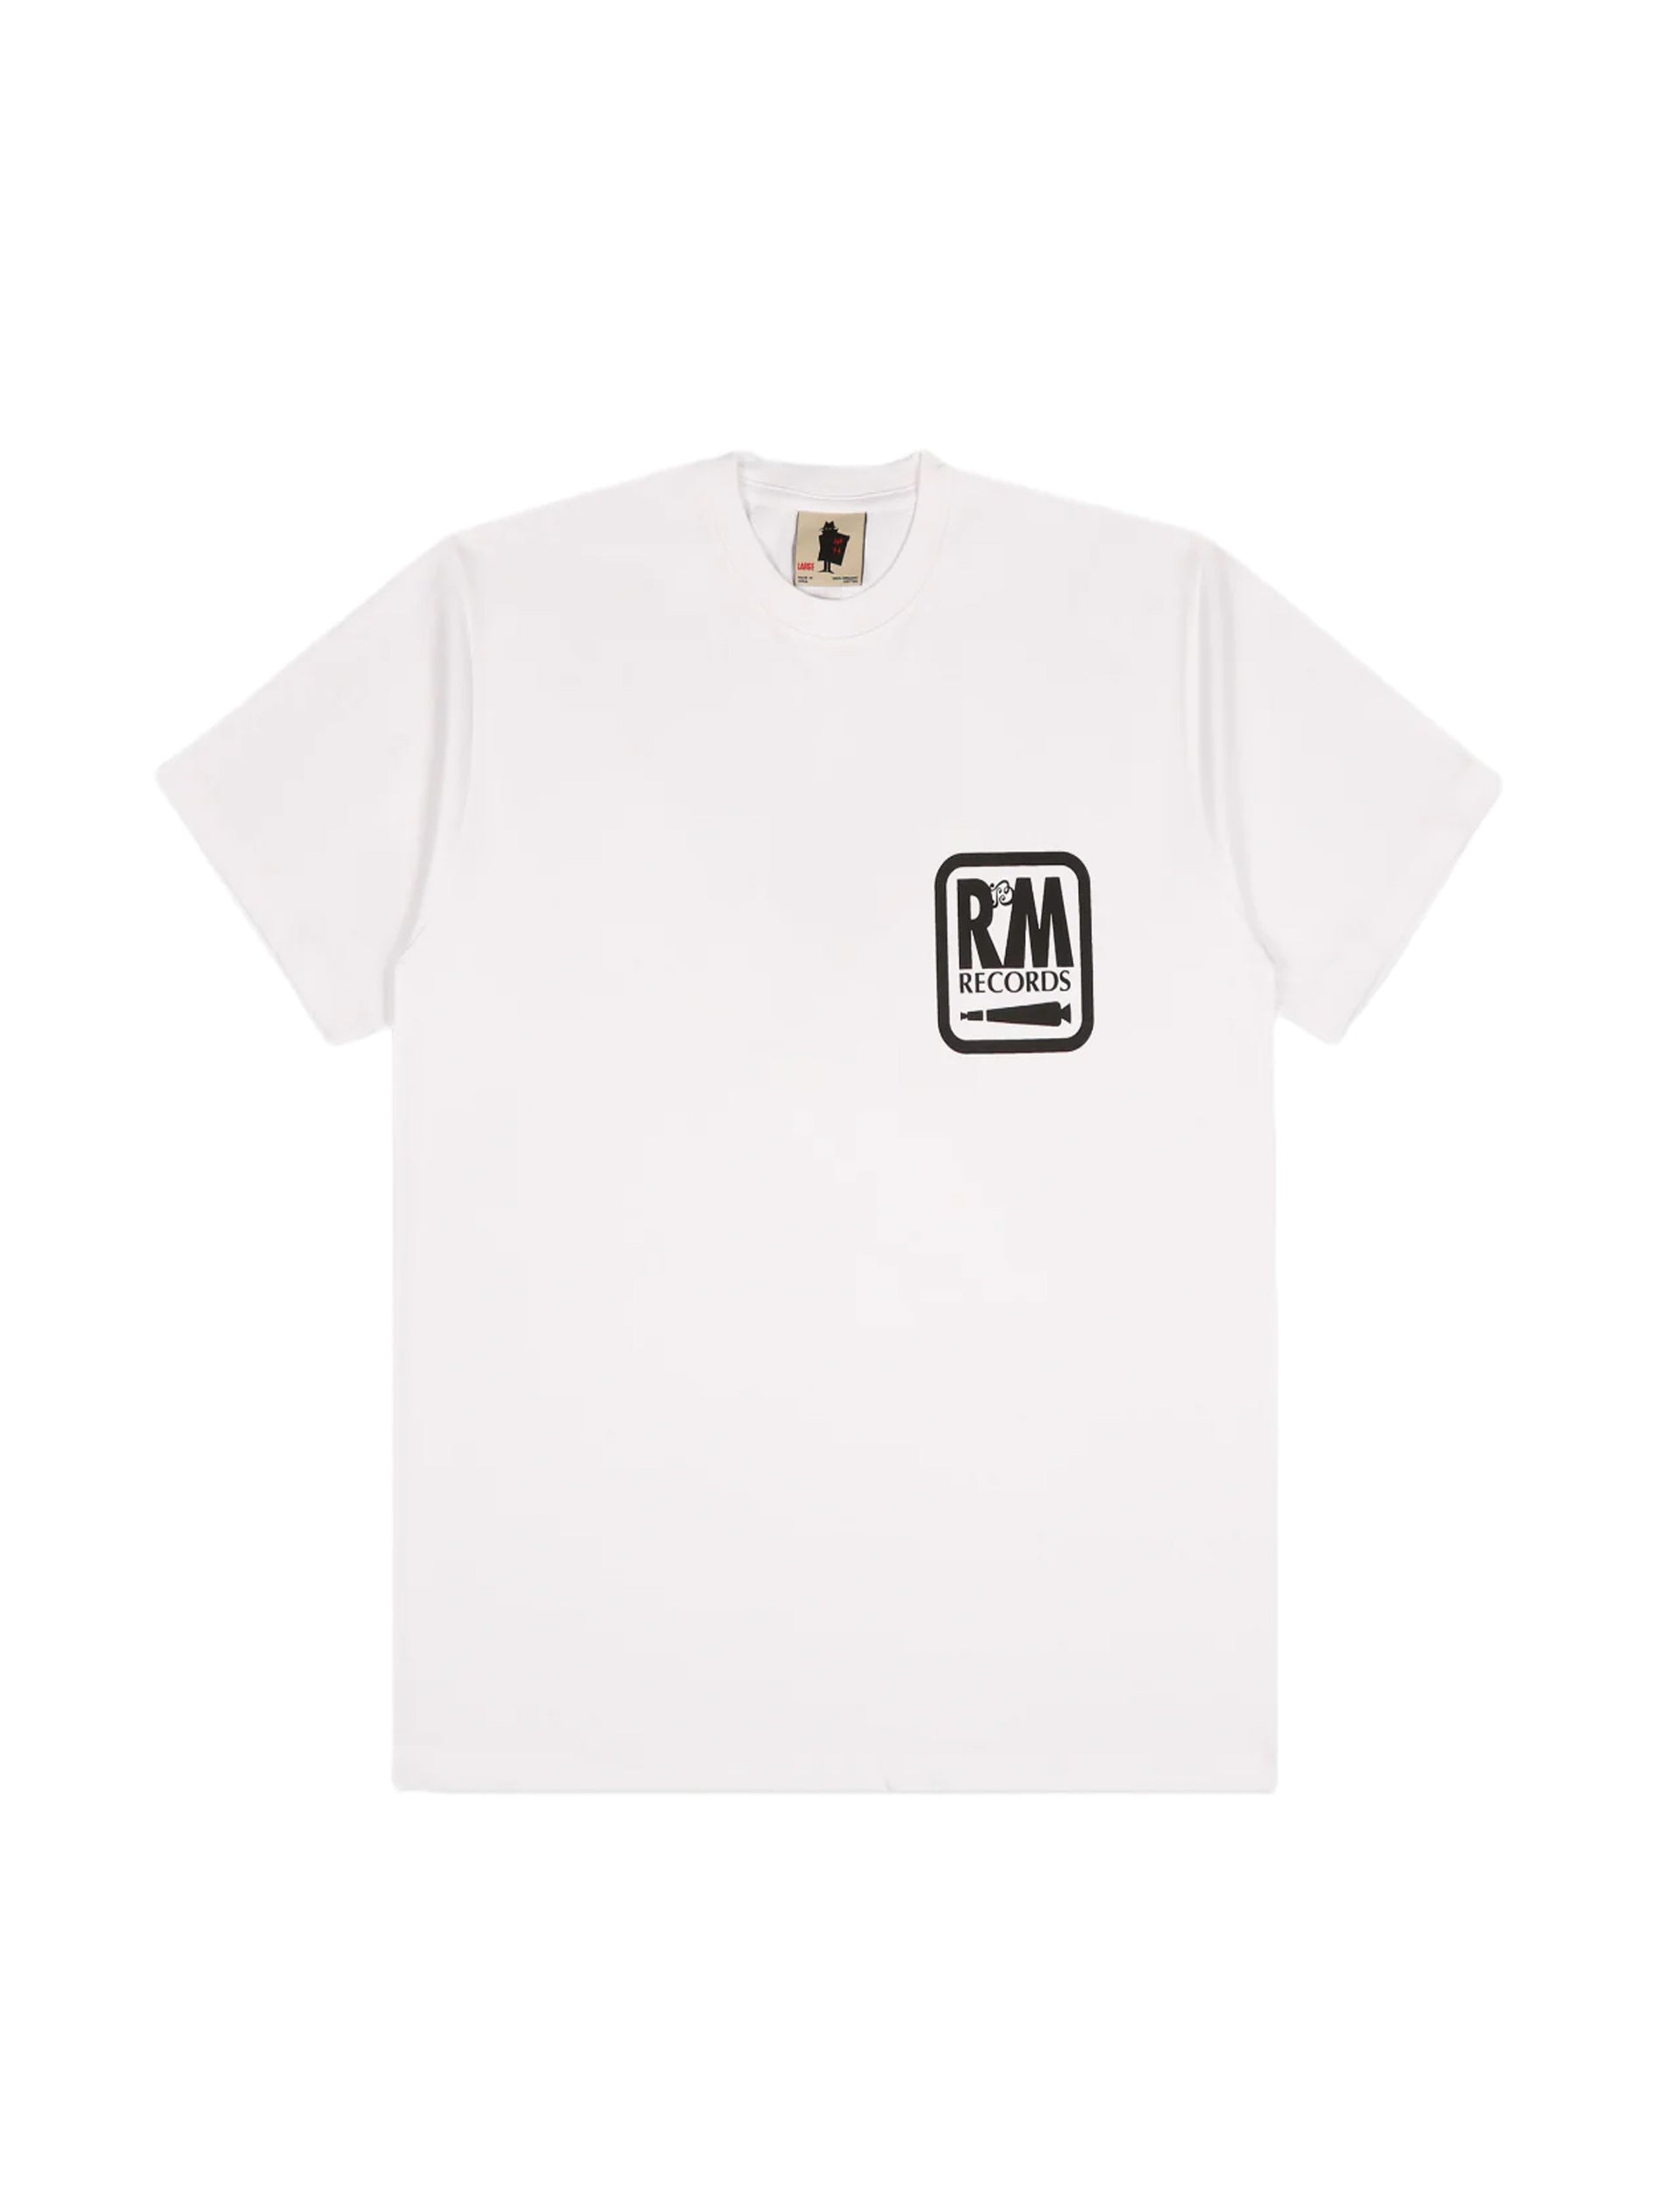 REAL BAD MAN SPECIAL DISCO VERSION SS TEE